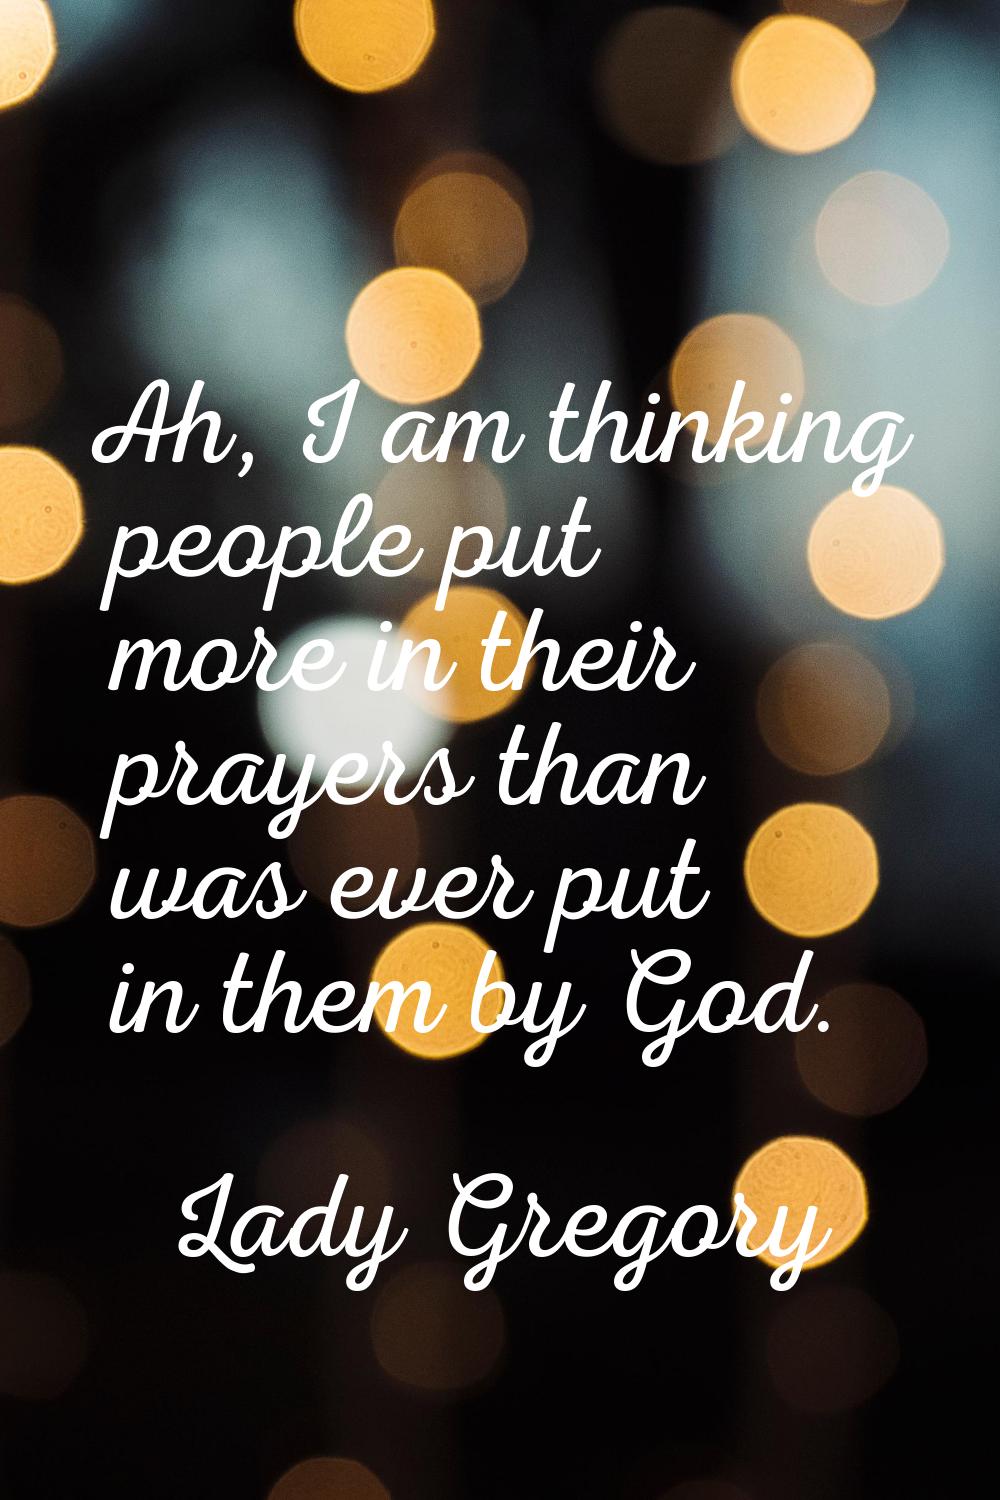 Ah, I am thinking people put more in their prayers than was ever put in them by God.